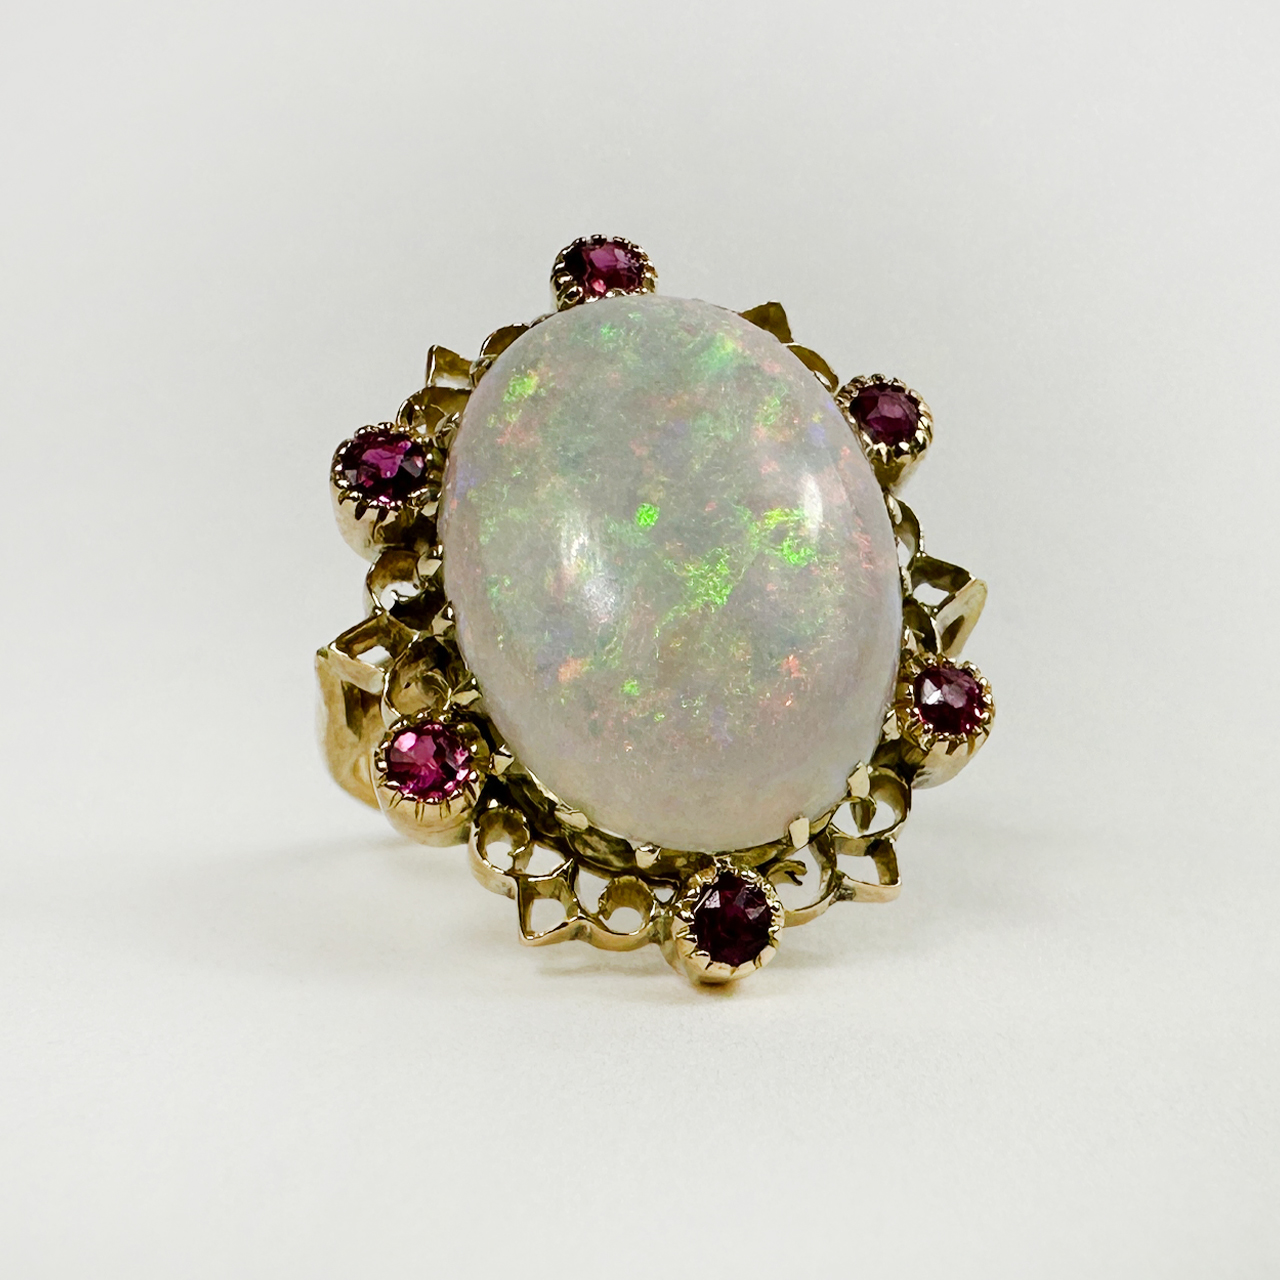 Stunning and Vibrant Large Opal and Ruby Statement Ring.  The opal has striking flashes of green and pink an is encircled by old cut rubies in a rub over setting. Set in 18 carat yellow gold.